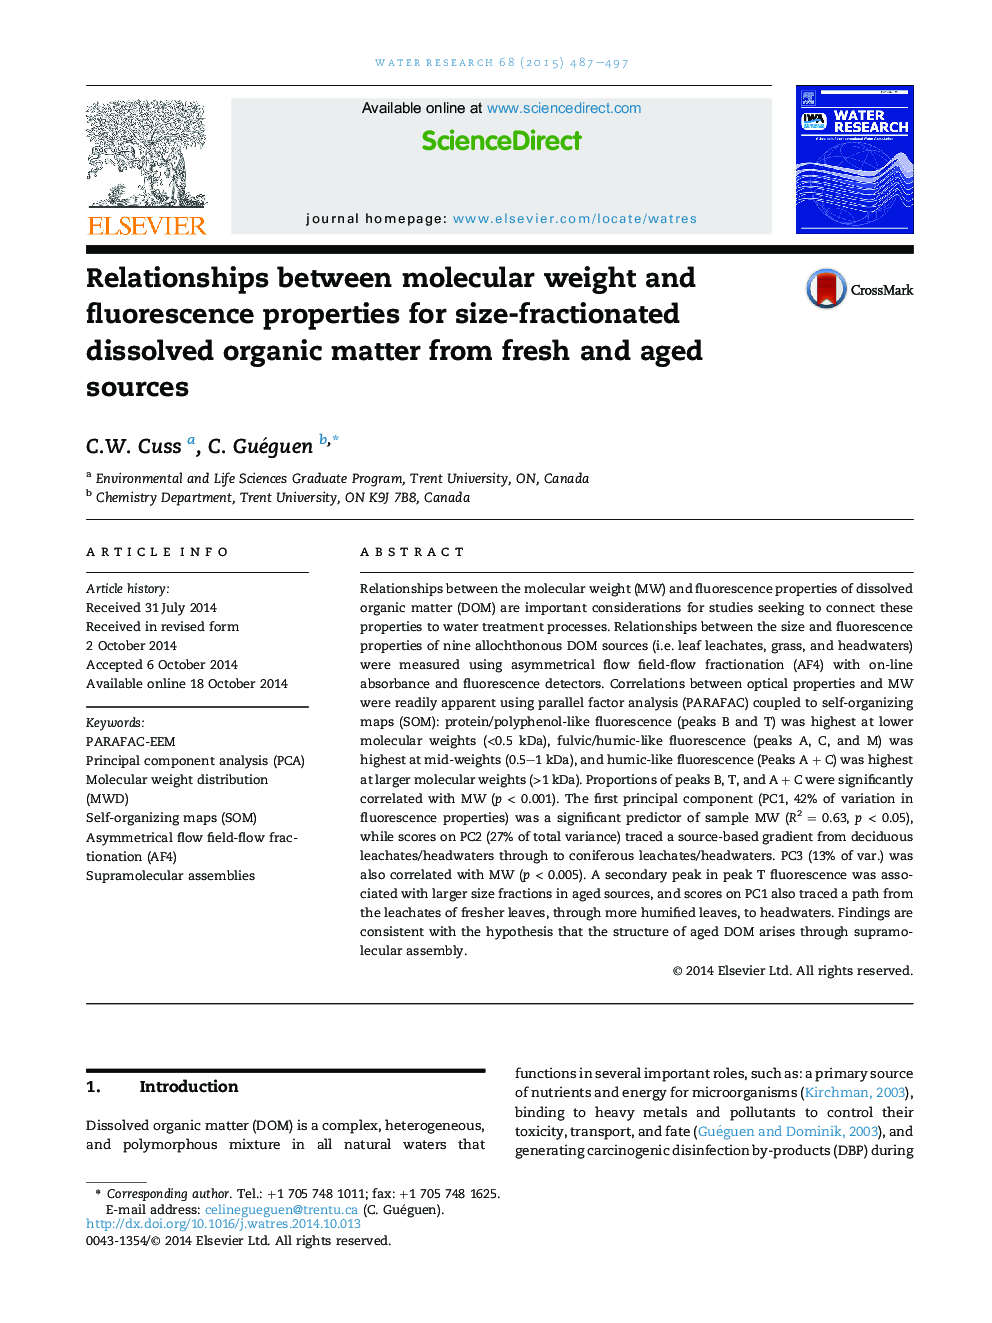 Relationships between molecular weight and fluorescence properties for size-fractionated dissolved organic matter from fresh and aged sources